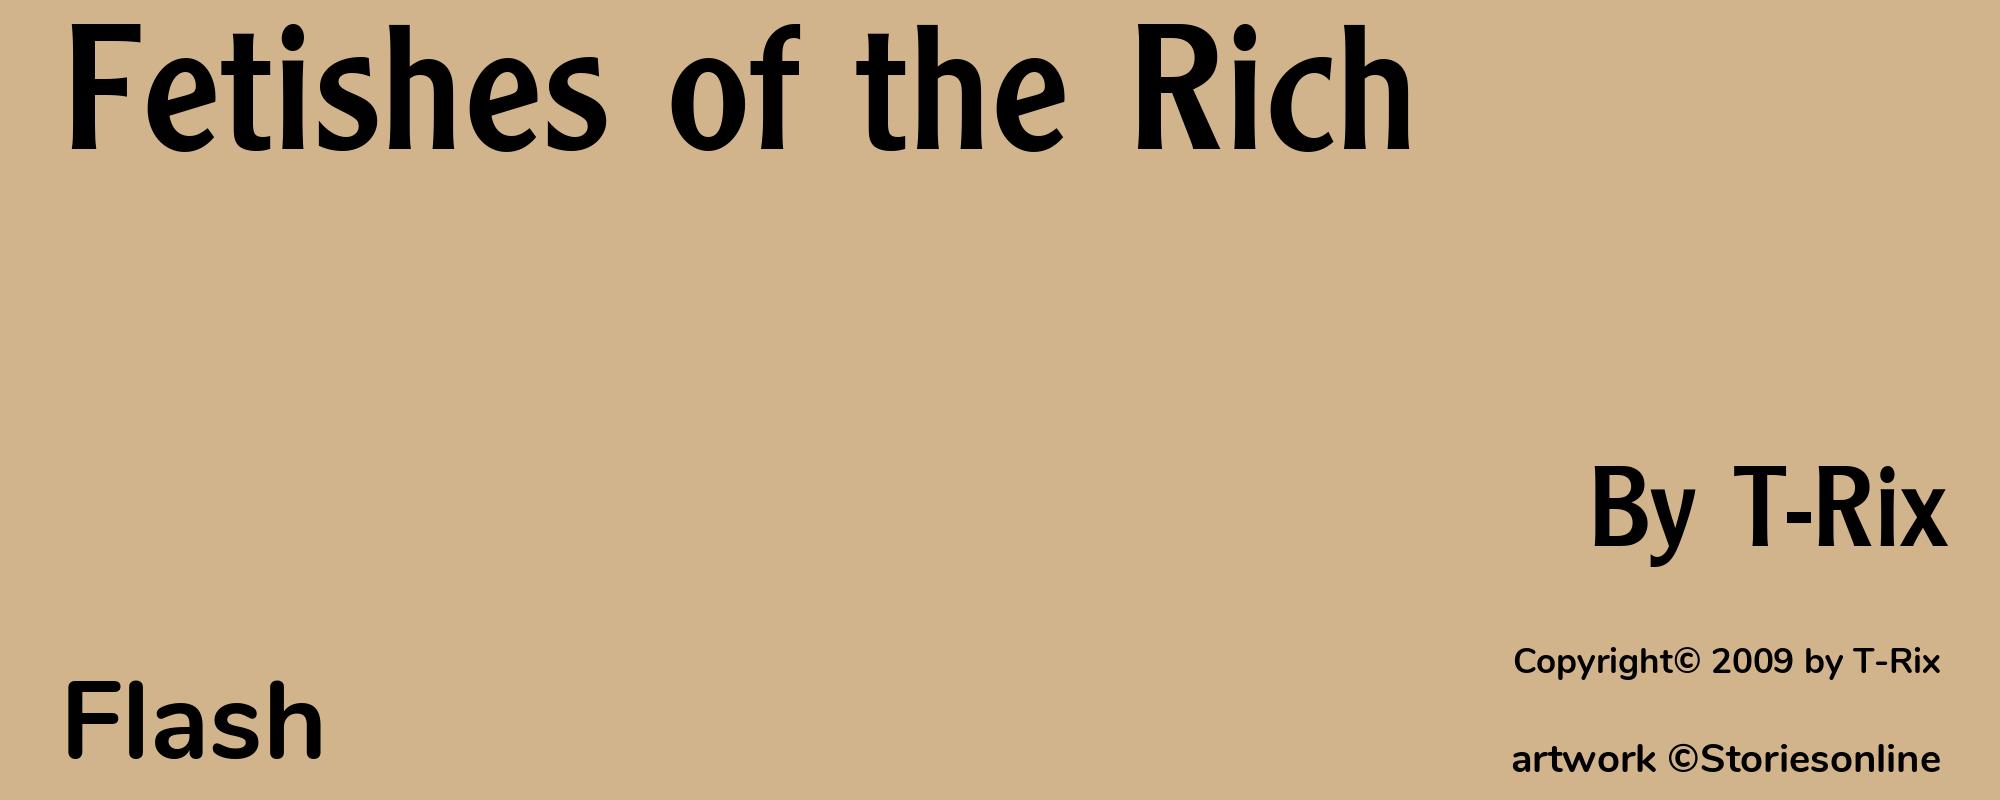 Fetishes of the Rich - Cover